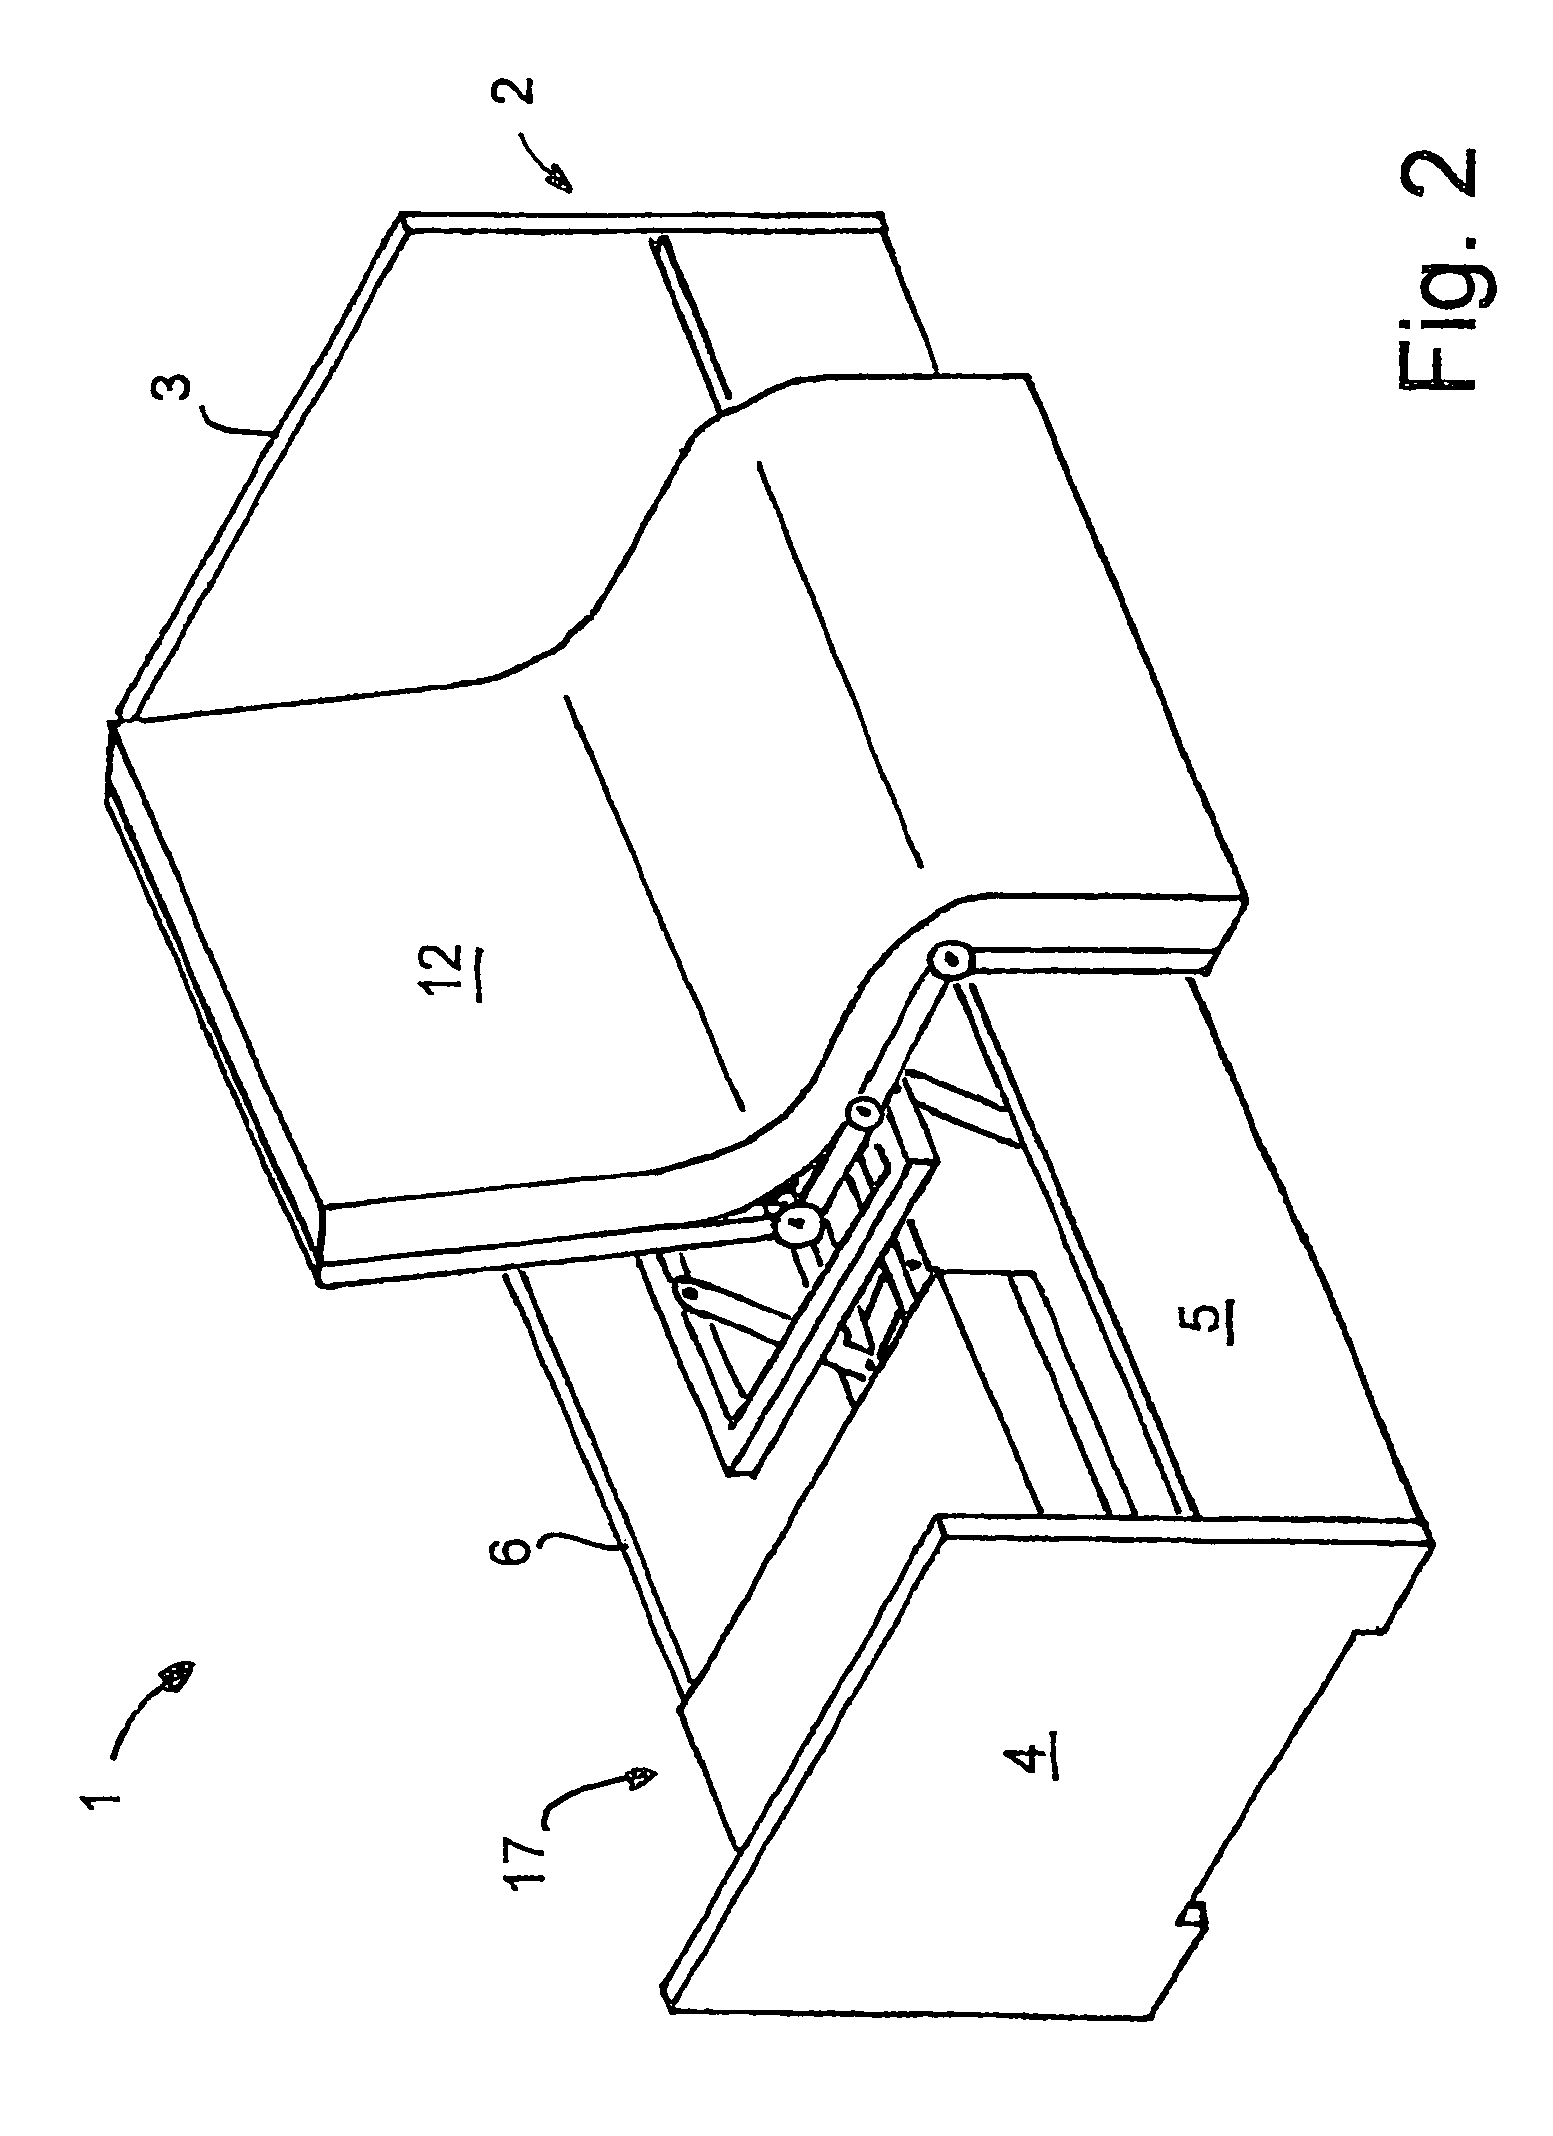 Rotary bed comprising an improved rotary hinge